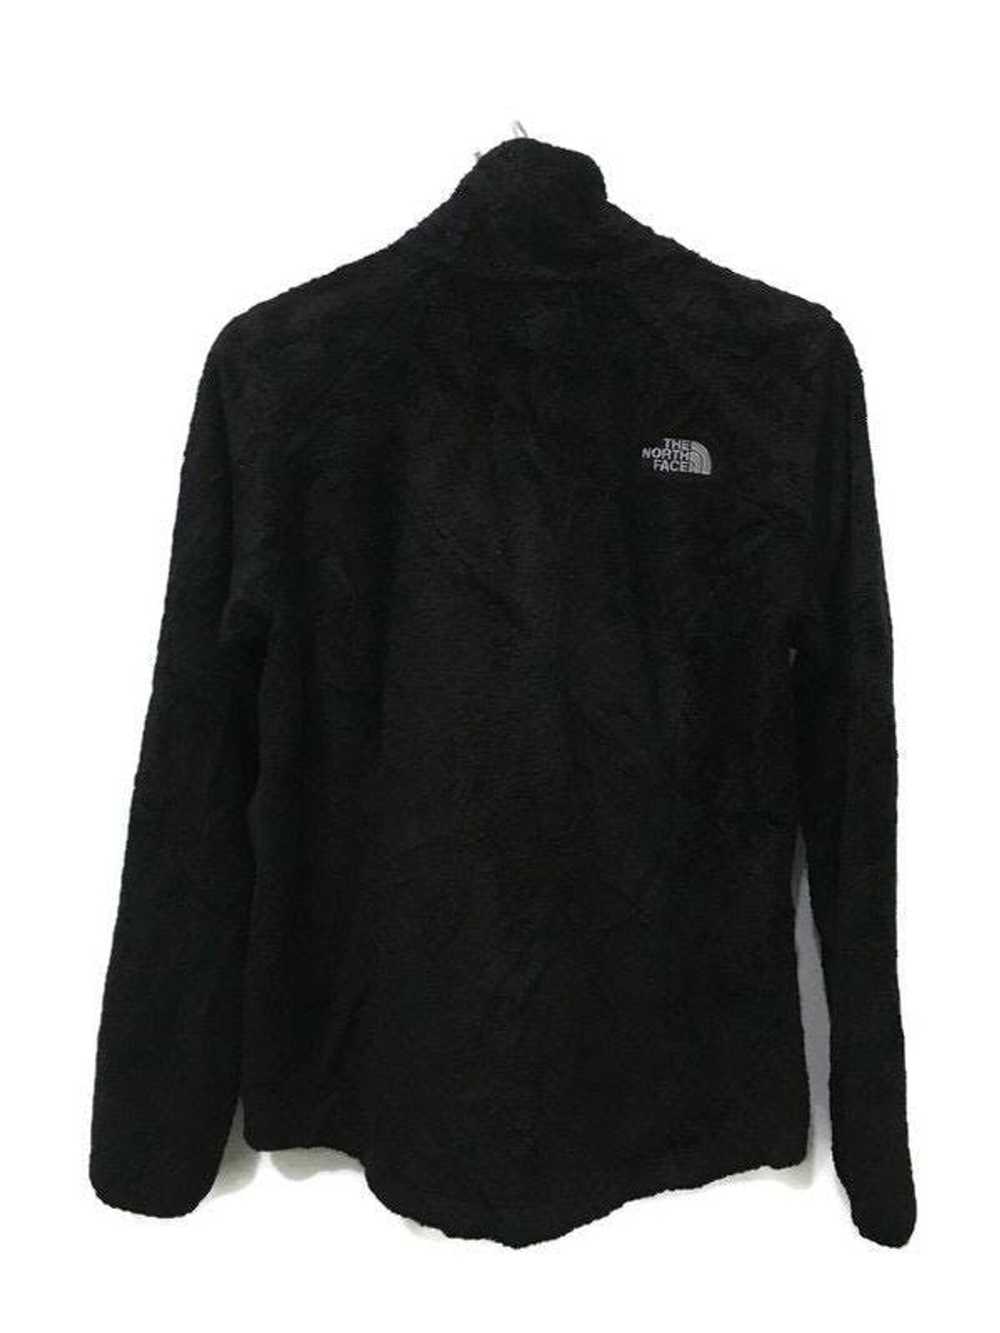 The North Face The North Face Velvet Jacket - image 3